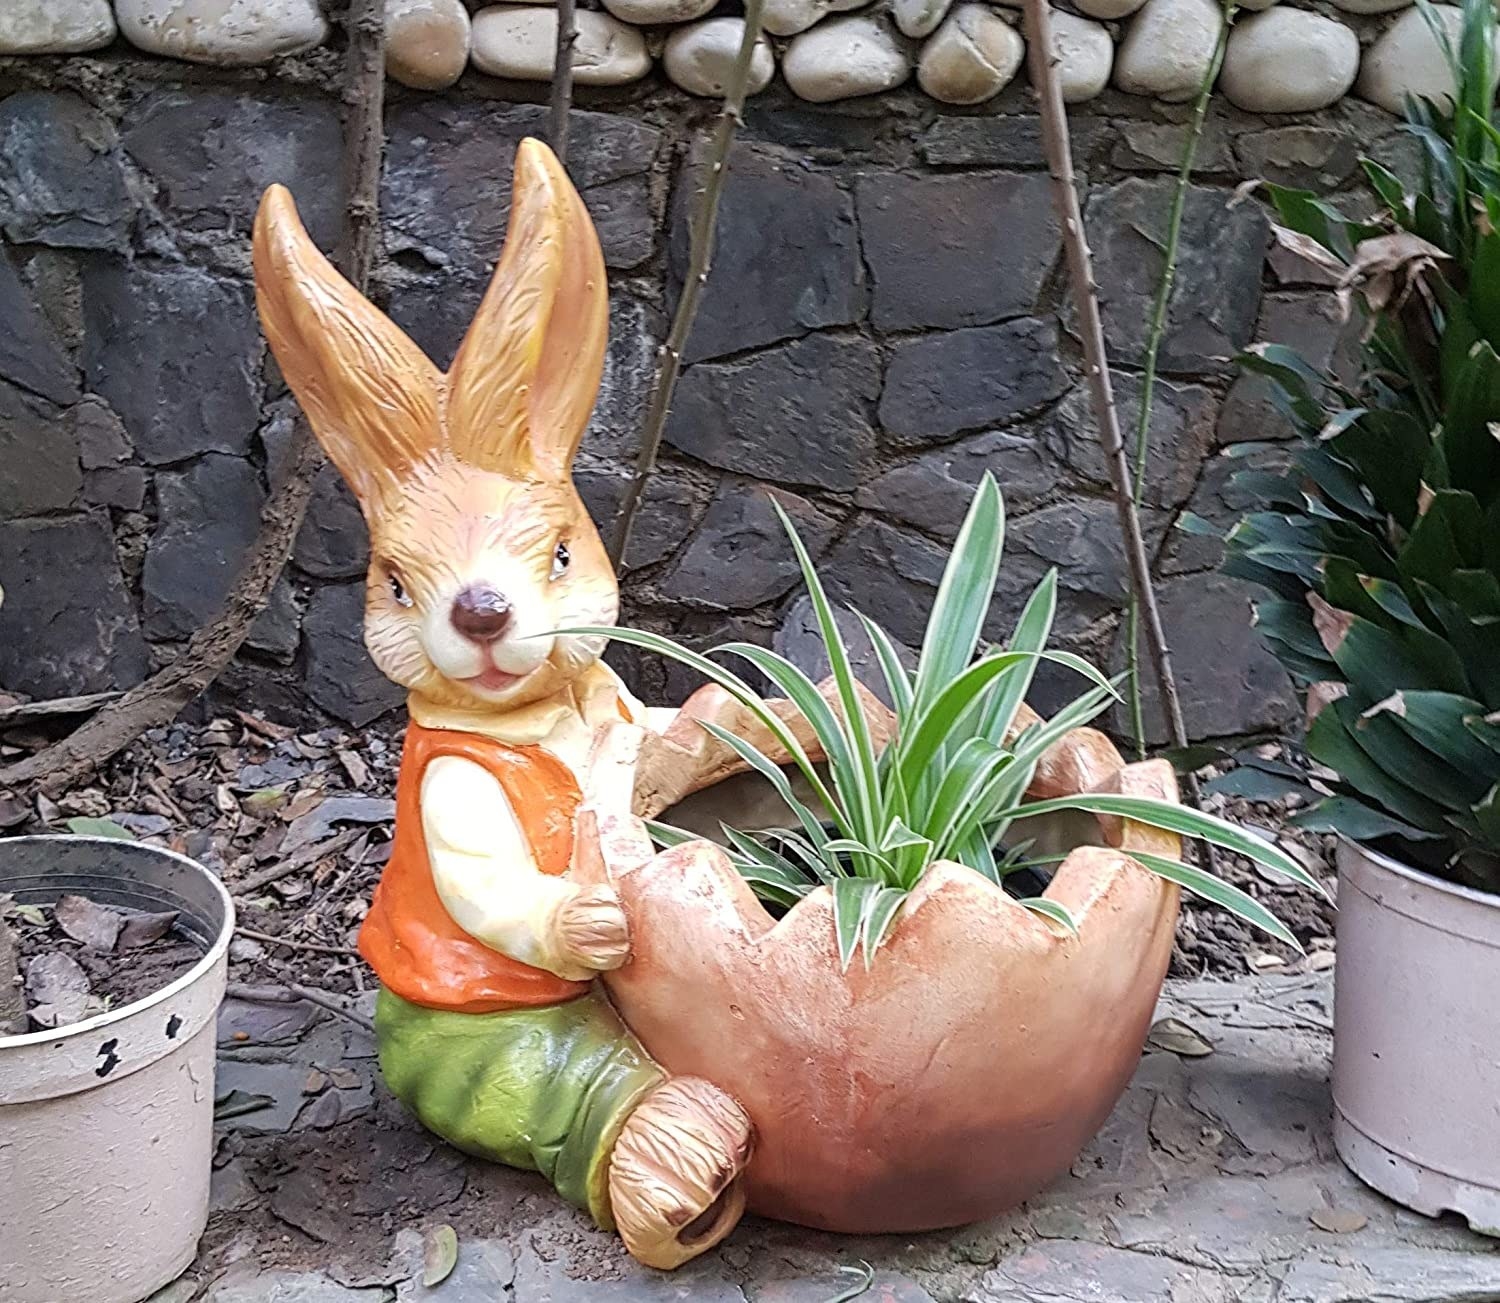 A planter in the shape of a bunny hugging a pot.